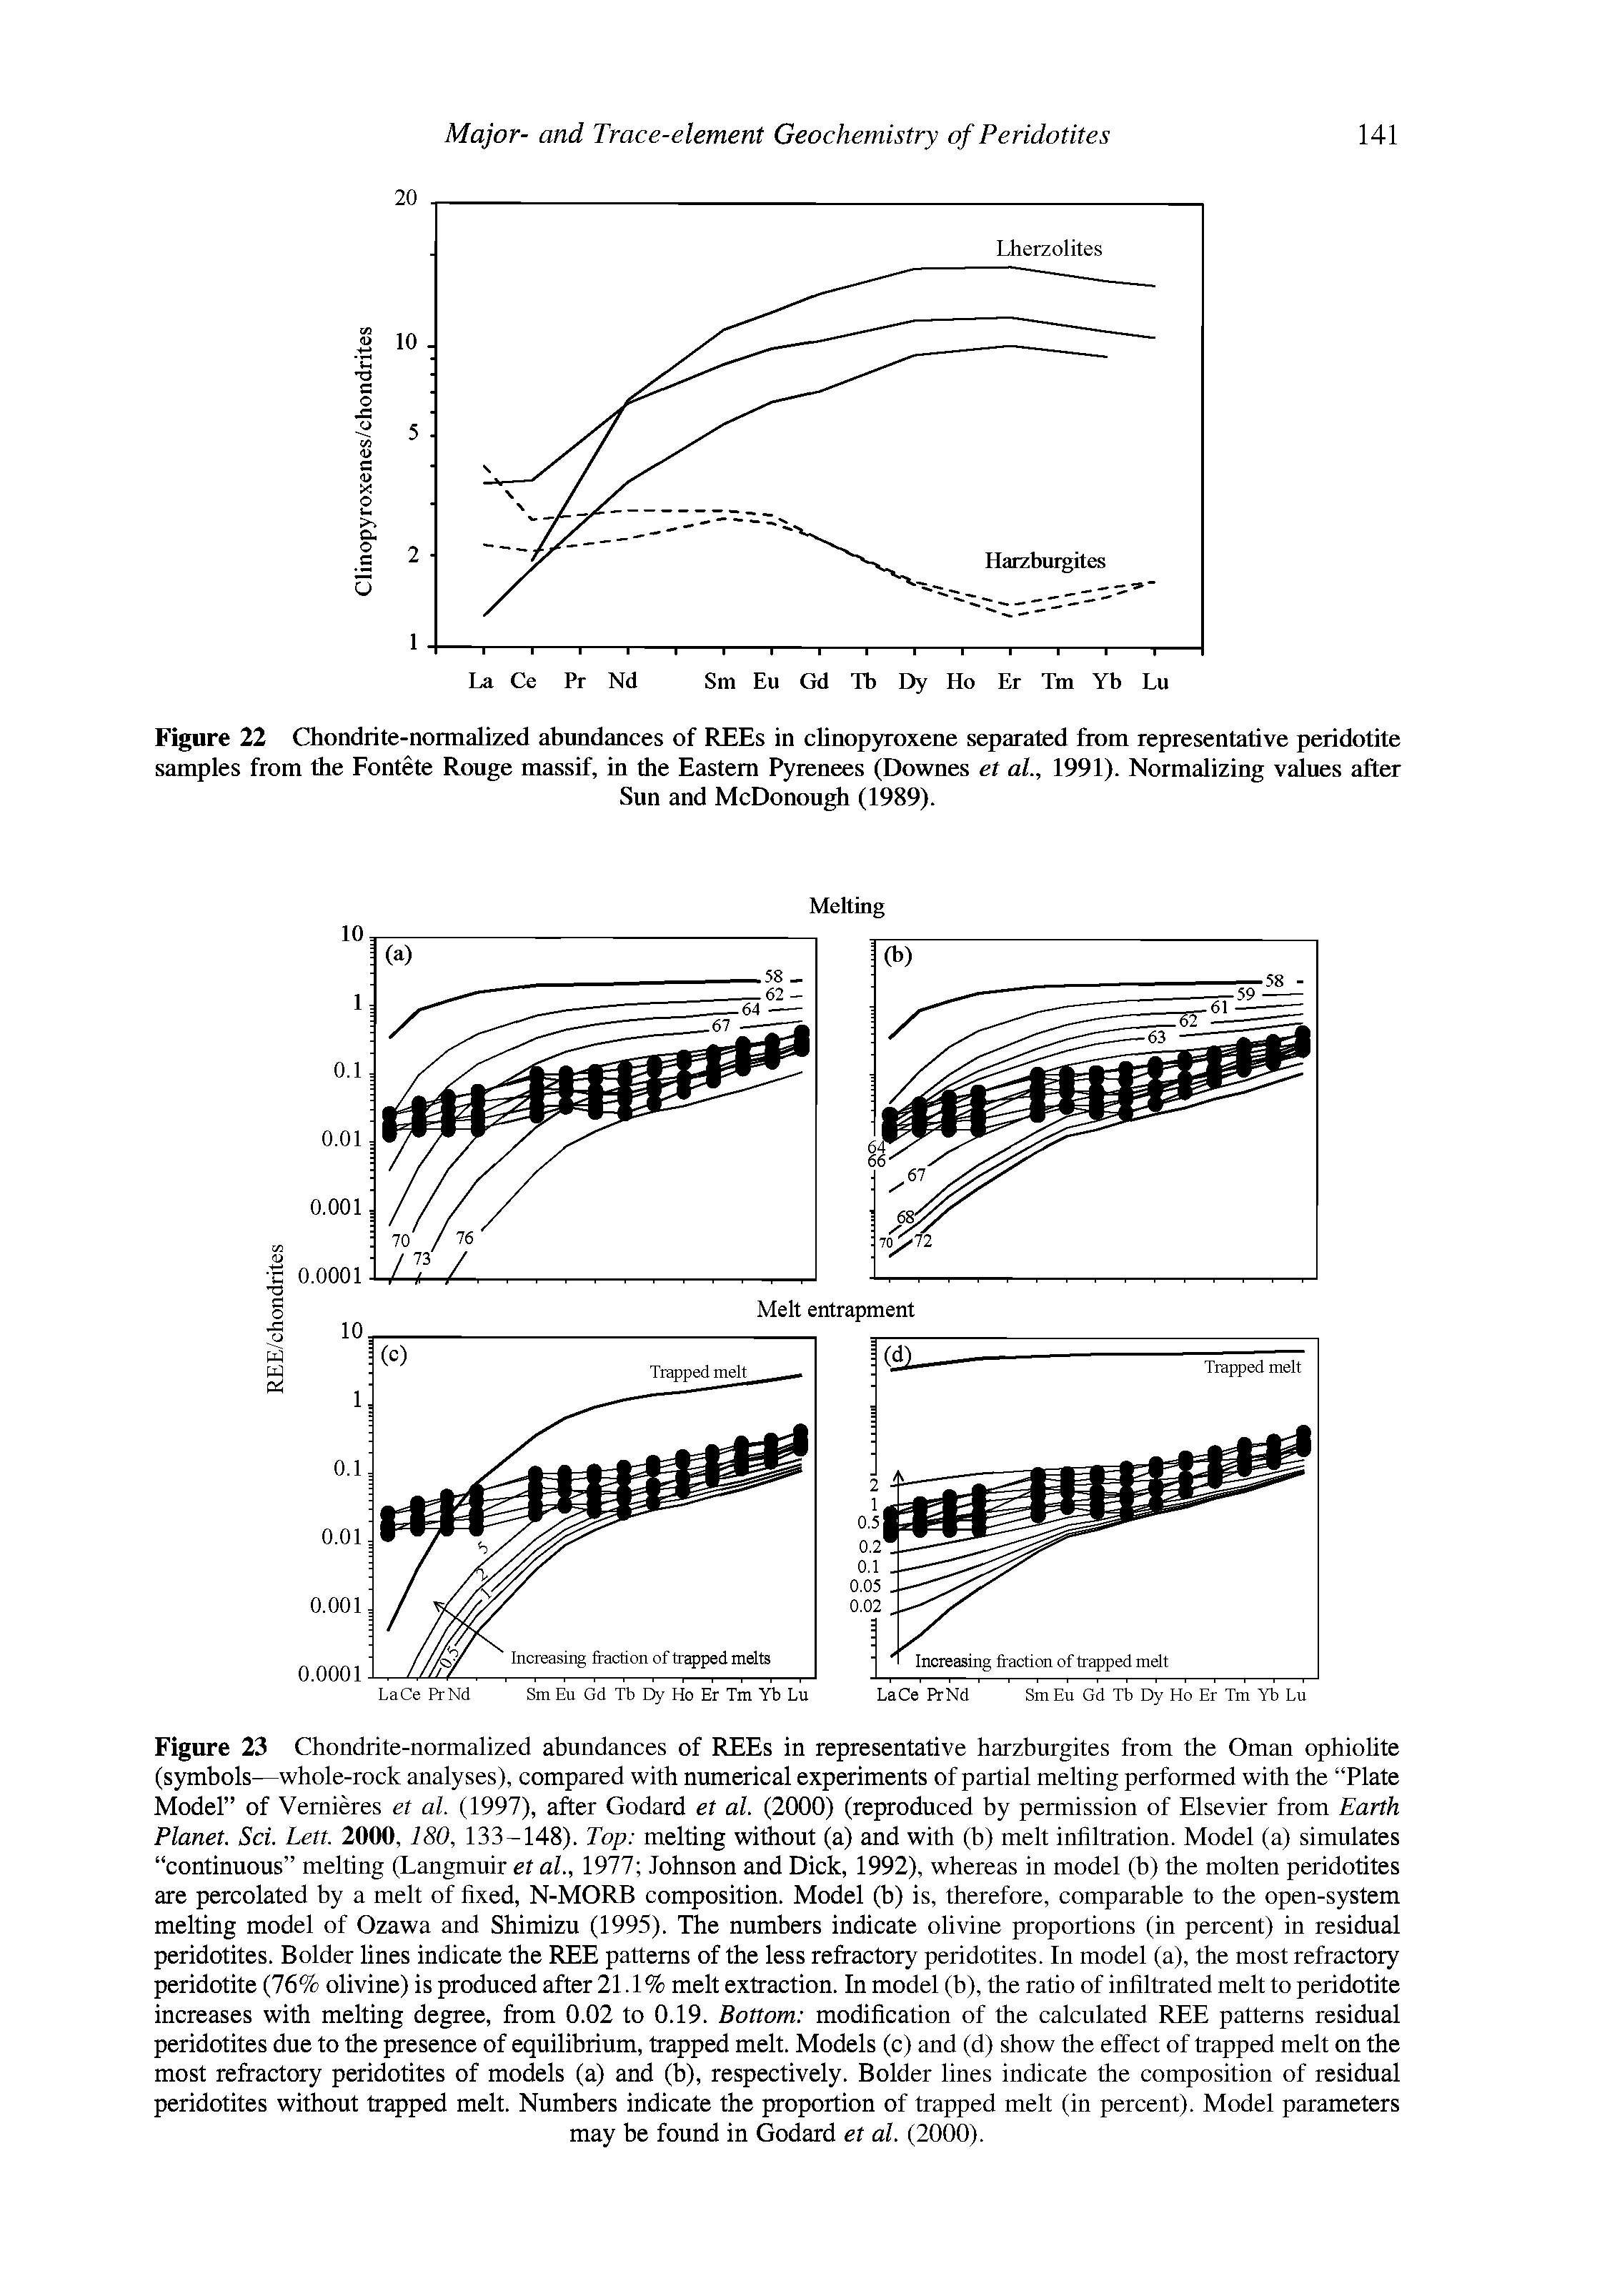 Figure 23 Chondrite-normalized abundances of REEs in representative harzburgites from the Oman ophiolite (symbols—whole-rock analyses), compared with numerical experiments of partial melting performed with the Plate Model of Vemieres et al. (1997), after Godard et al. (2000) (reproduced by permission of Elsevier from Earth Planet. Set Lett. 2000, 180, 133-148). Top melting without (a) and with (b) melt infiltration. Model (a) simulates continuous melting (Langmuir et al., 1977 Johnson and Dick, 1992), whereas in model (b) the molten peridotites are percolated by a melt of fixed, N-MORB composition. Model (b) is, therefore, comparable to the open-system melting model of Ozawa and Shimizu (1995). The numbers indicate olivine proportions (in percent) in residual peridotites. Bolder lines indicate the REE patterns of the less refractory peridotites. In model (a), the most refractory peridotite (76% olivine) is produced after 21.1% melt extraction. In model (b), the ratio of infiltrated melt to peridotite increases with melting degree, from 0.02 to 0.19. Bottom modification of the calculated REE patterns residual peridotites due to the presence of equilibrium, trapped melt. Models (c) and (d) show the effect of trapped melt on the most refractory peridotites of models (a) and (b), respectively. Bolder lines indicate the composition of residual peridotites without trapped melt. Numbers indicate the proportion of trapped melt (in percent). Model parameters...